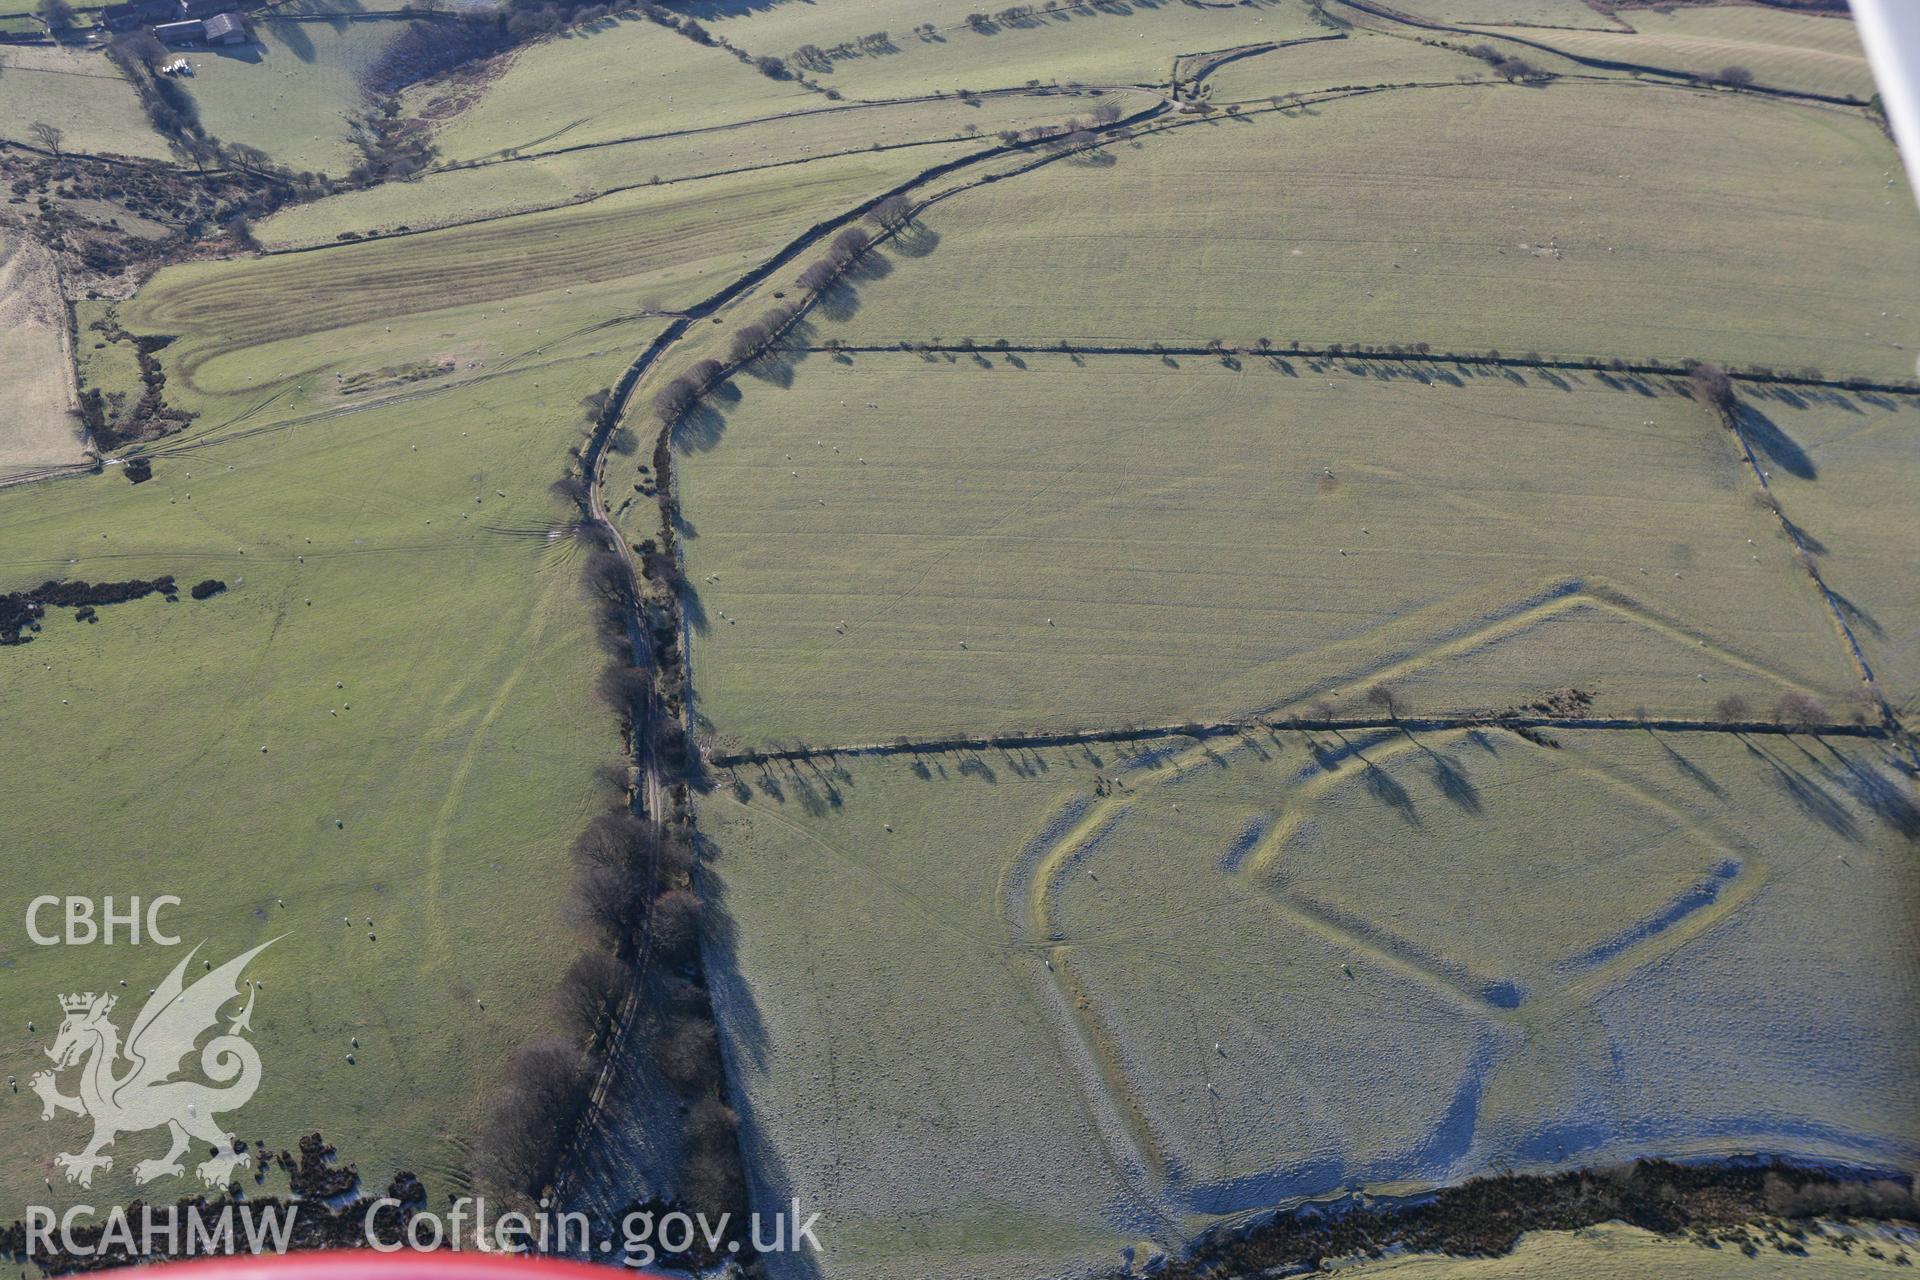 RCAHMW colour oblique photograph of Moel Ton-mawr hillfort. Taken by Toby Driver on 08/12/2010.